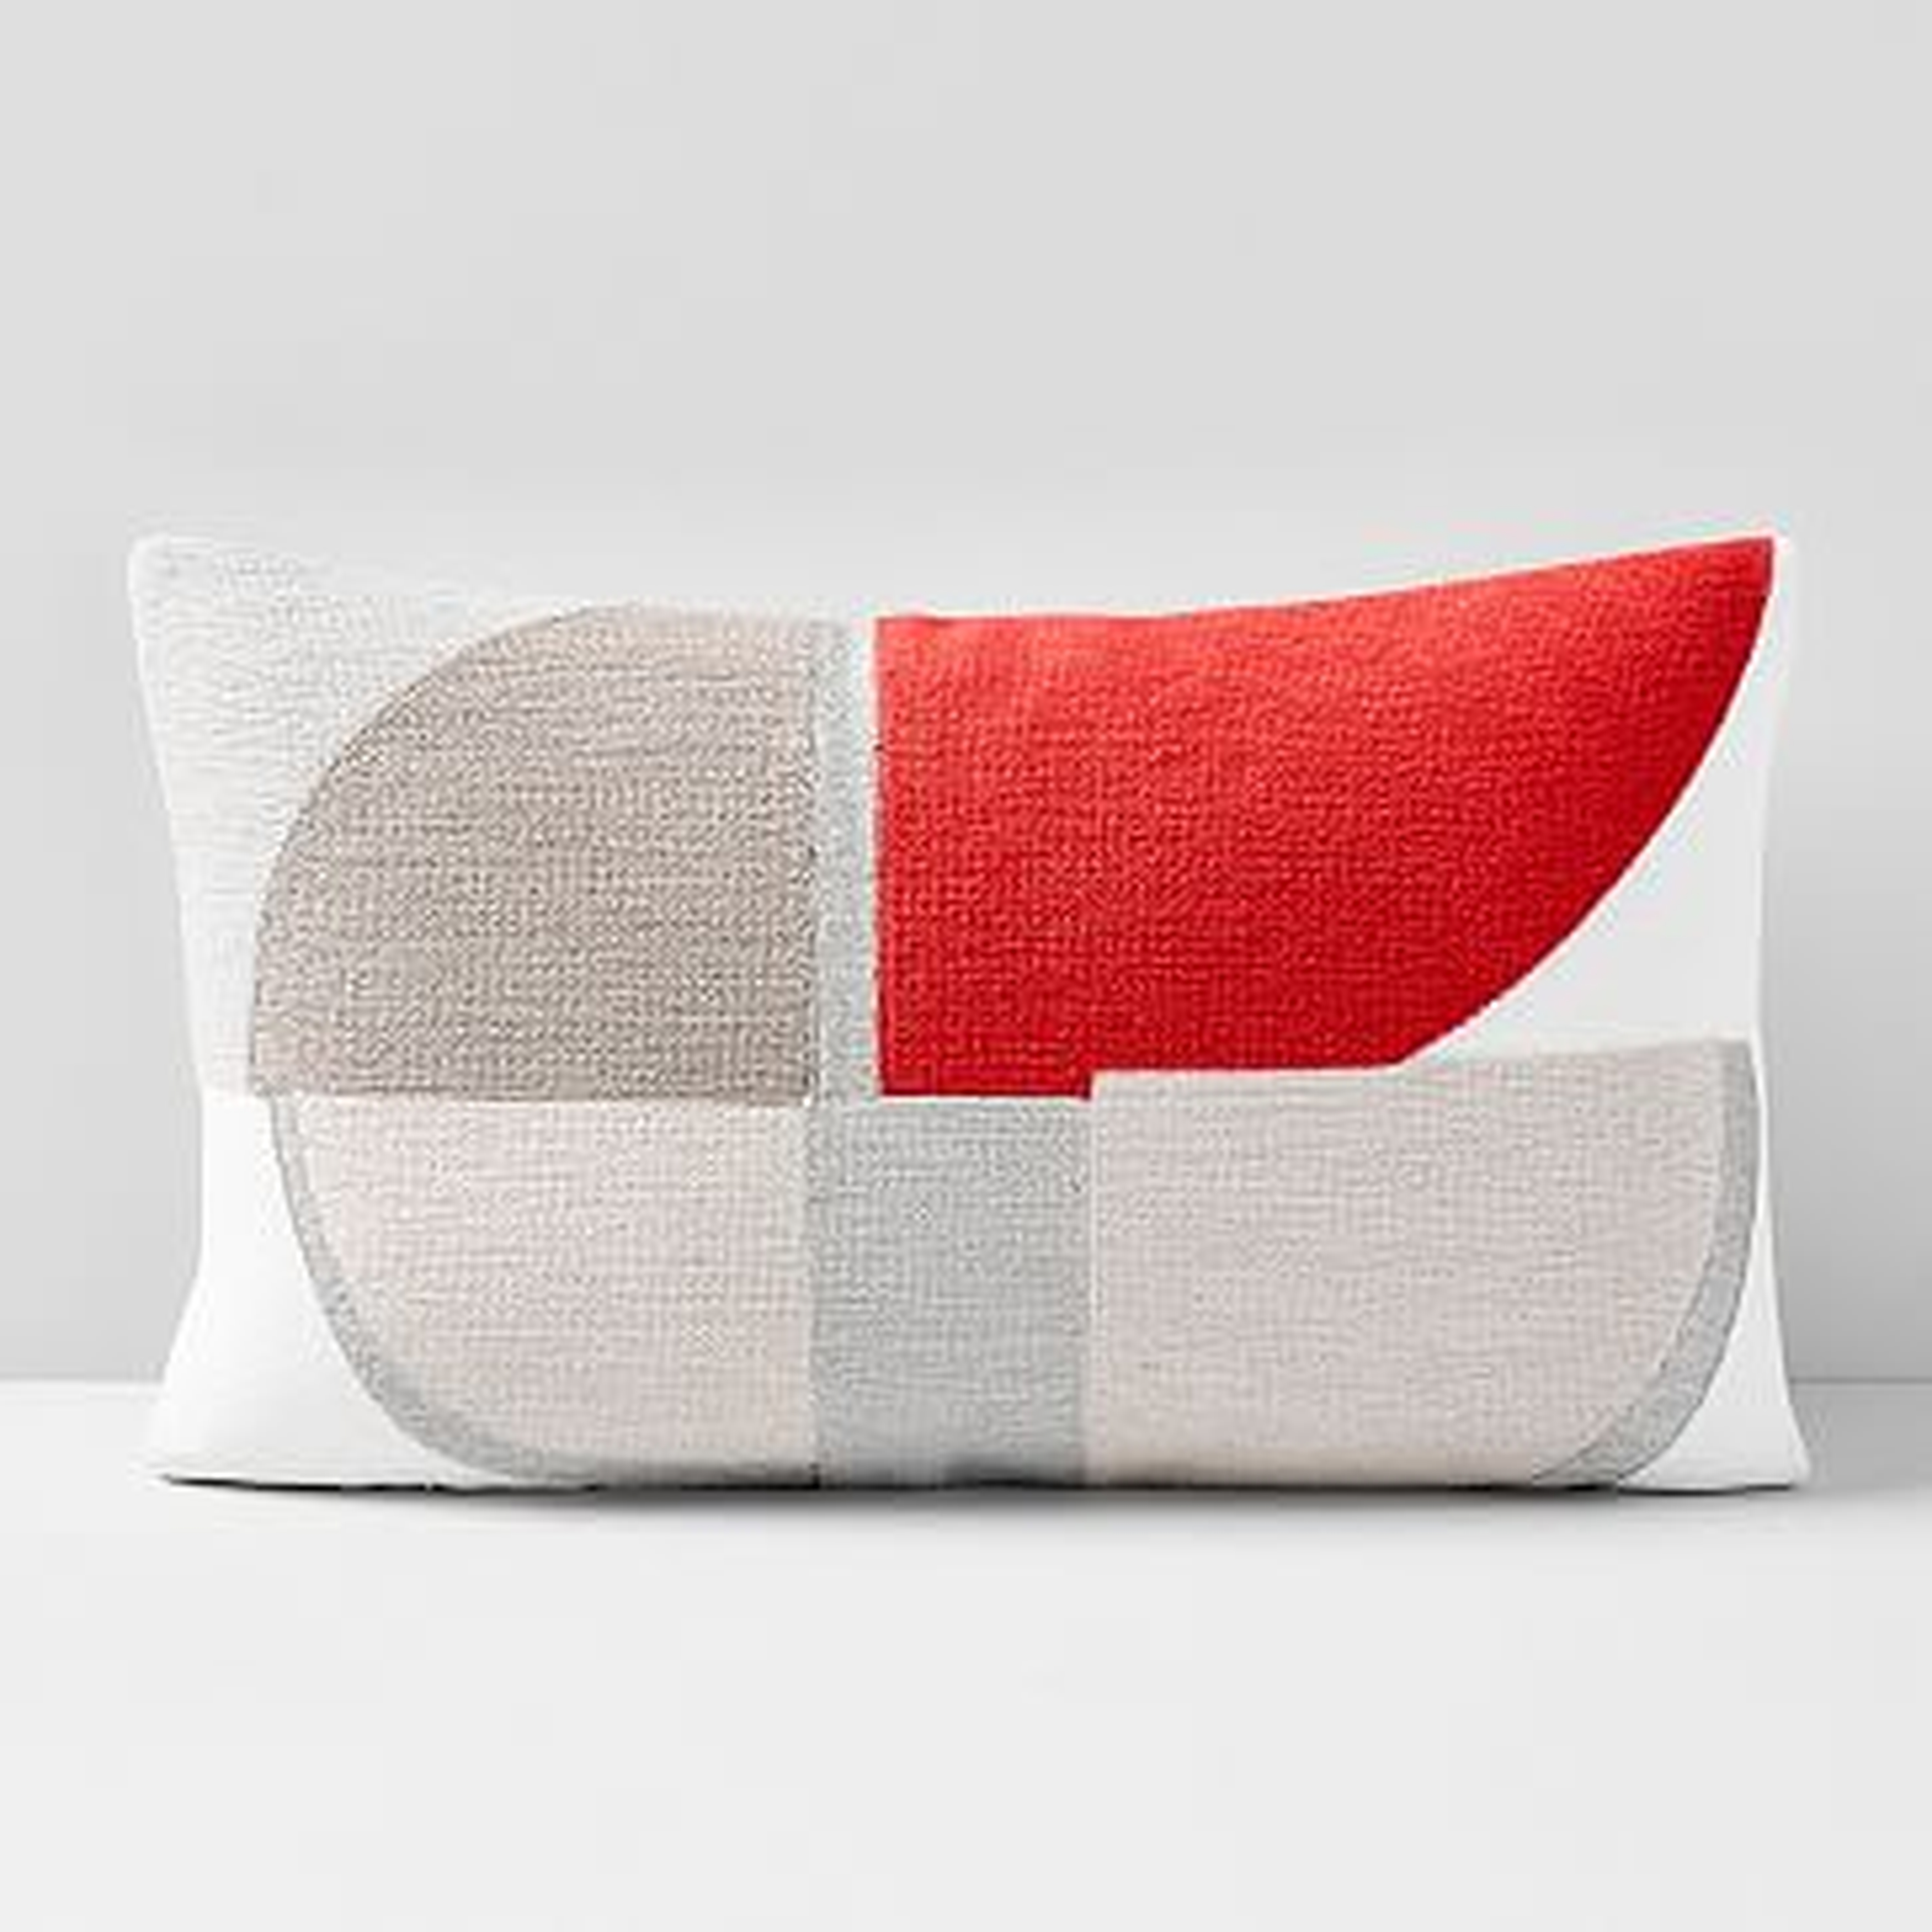 Corded Quadrant Pillow Cover, 12"x21", So Red - West Elm